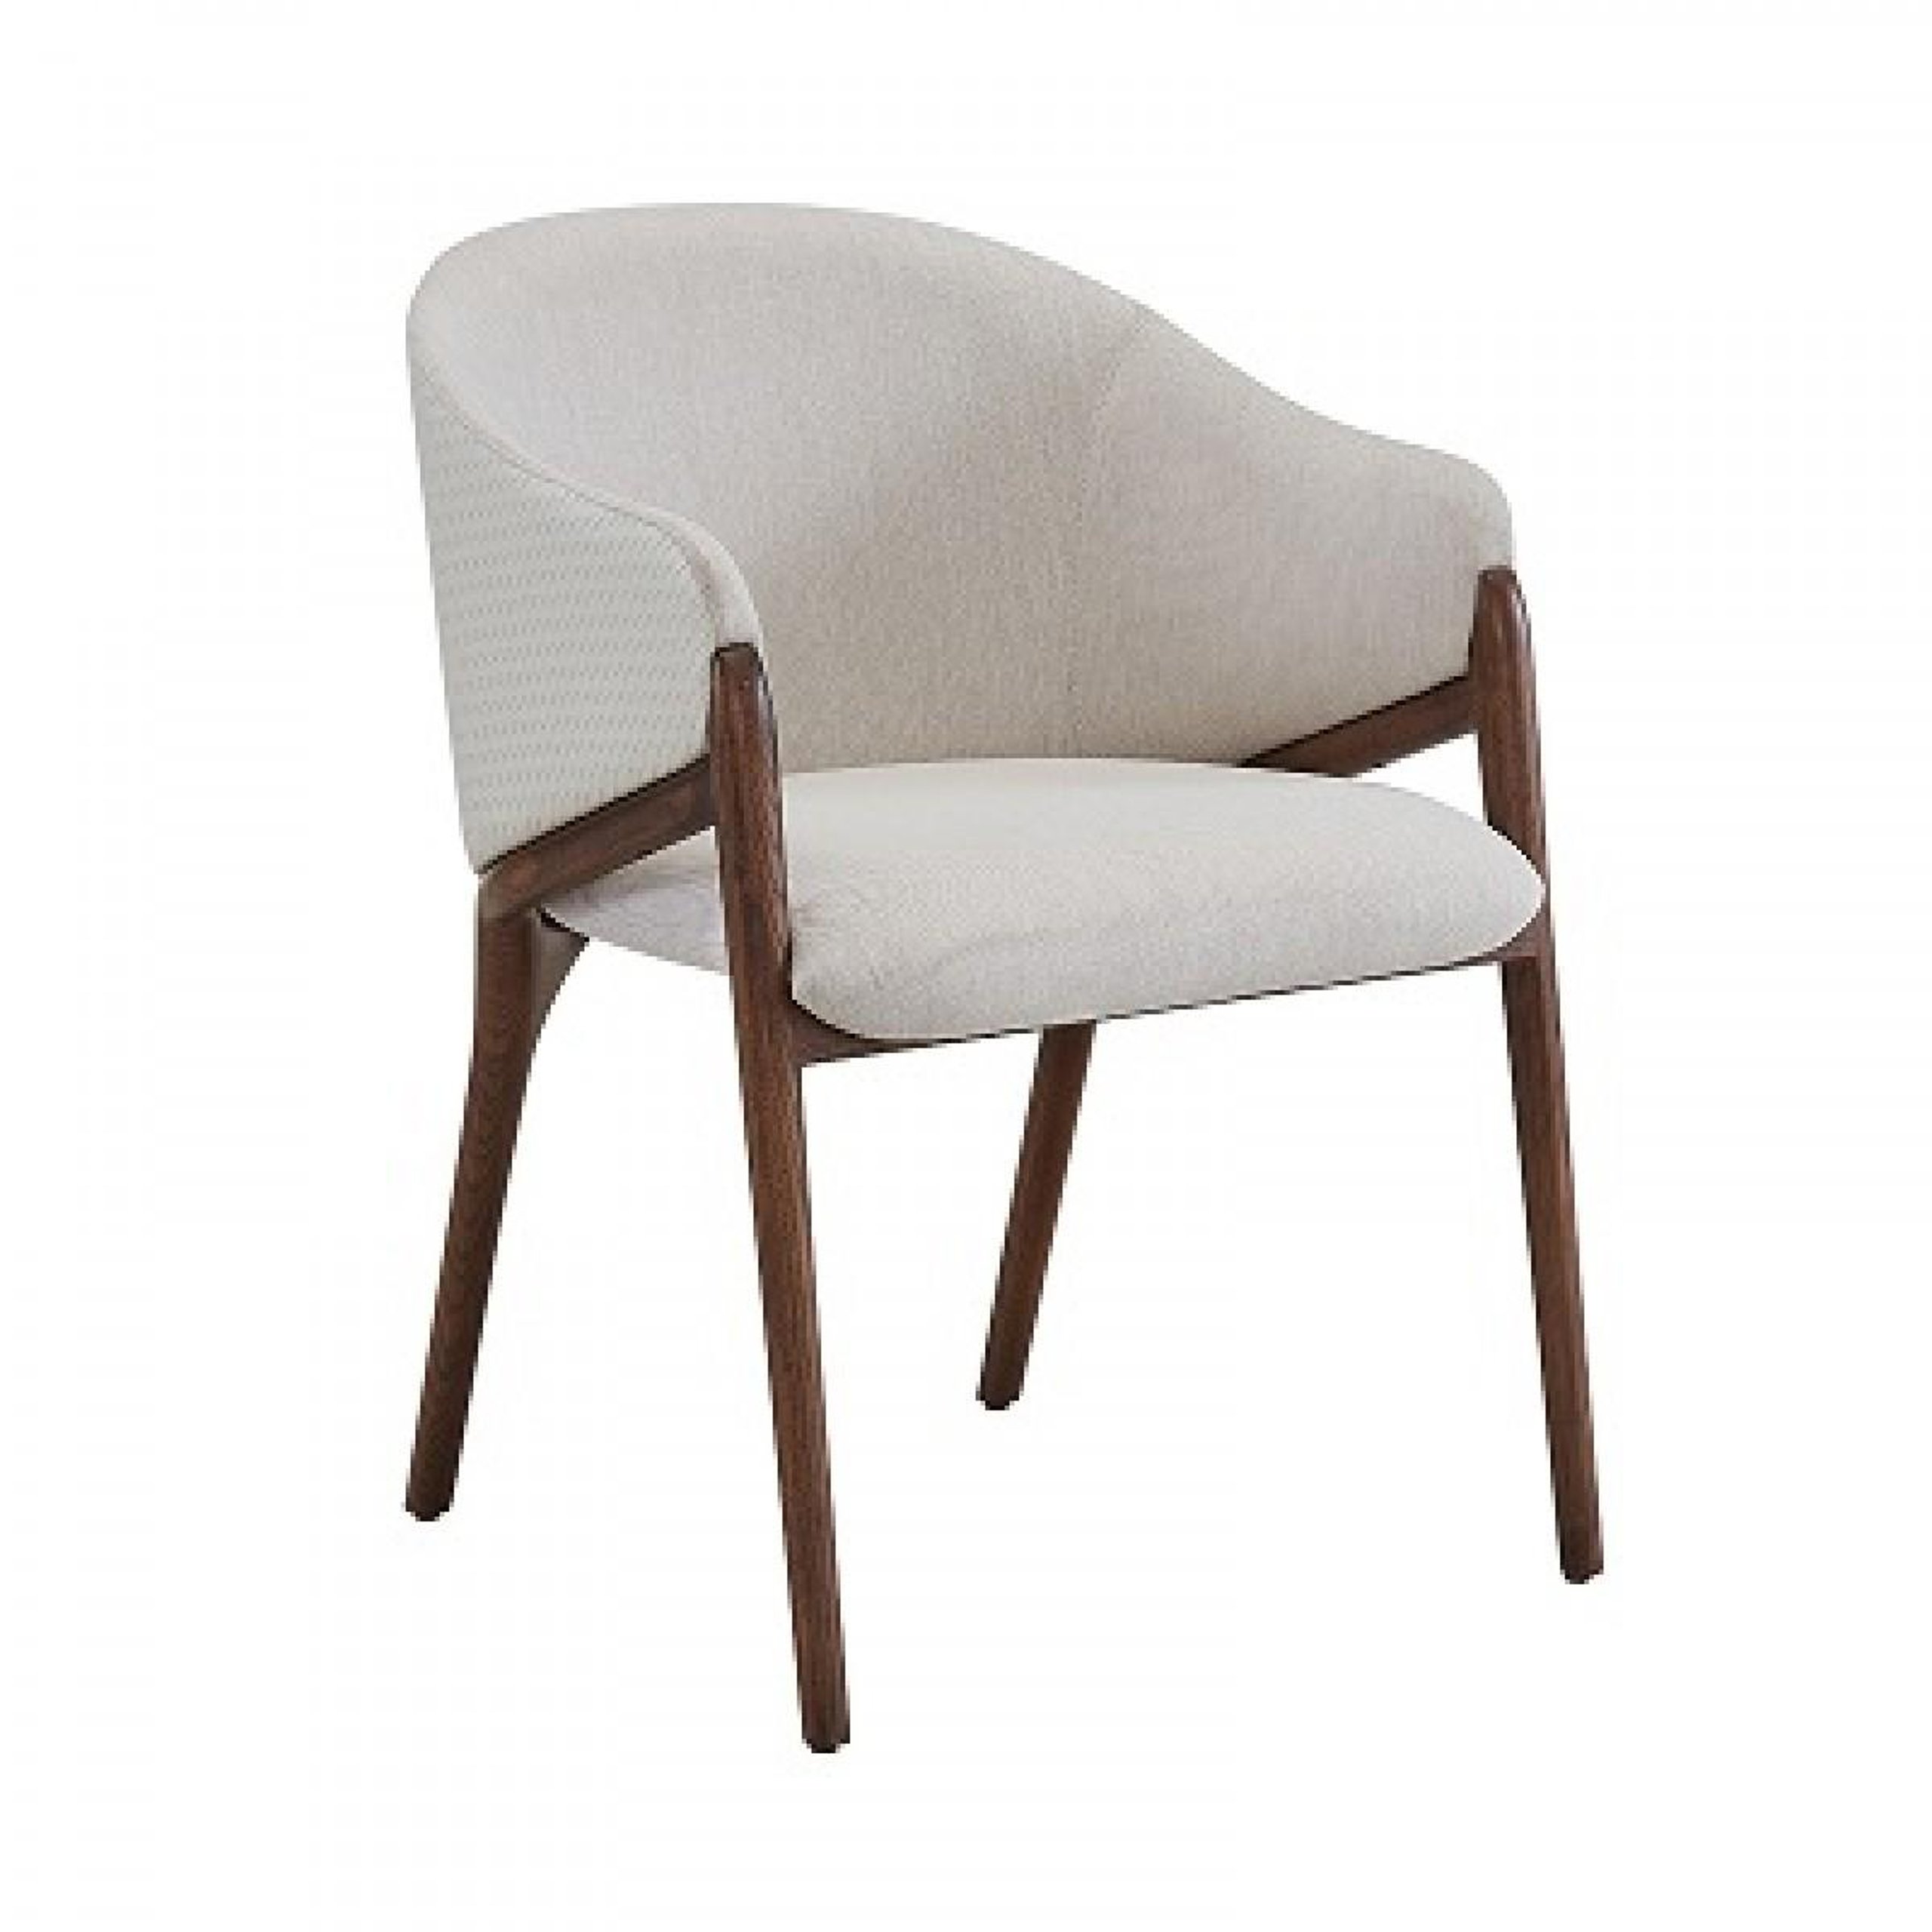 Modrest Stanley - Contemporary Cream Leatherette and Walnut Dining